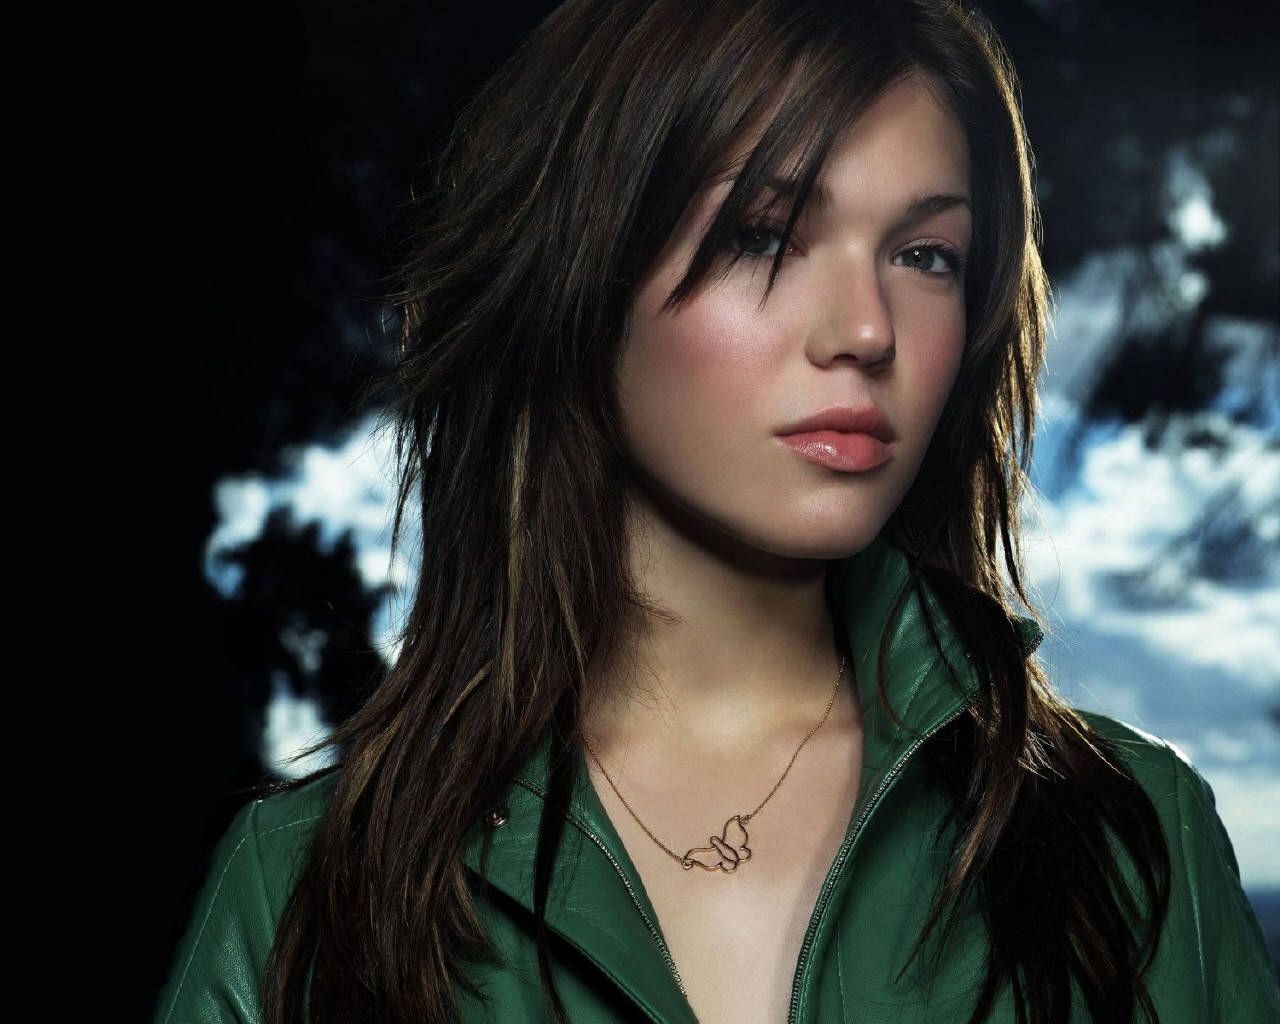 New Mandy Moore 2020 Wallpapers